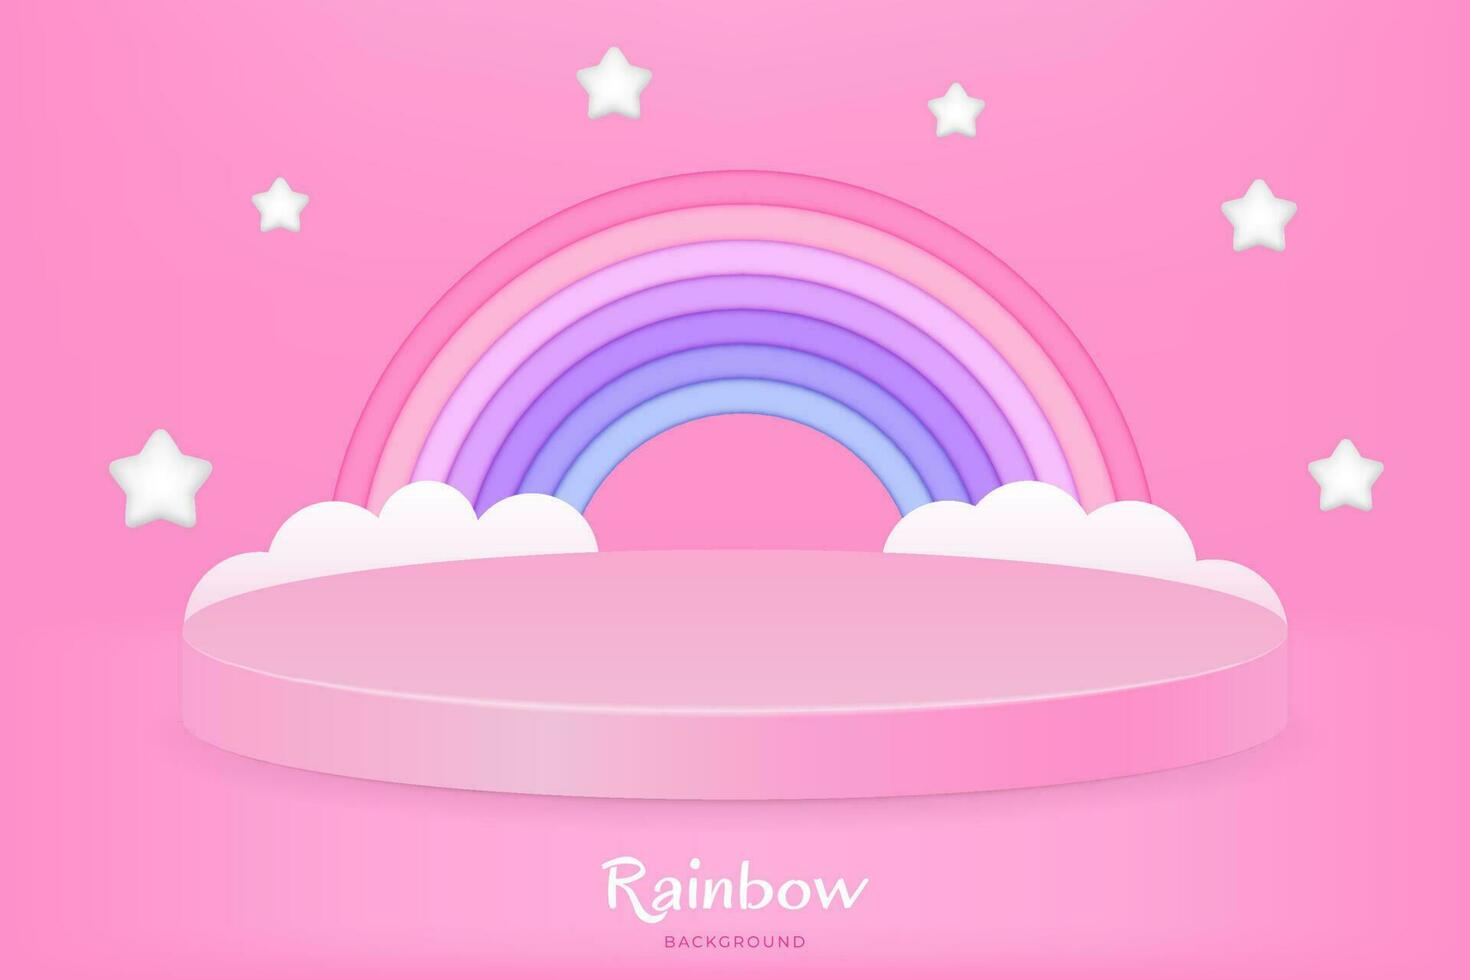 Podium with Clay Effect Rainbow and Clouds. Abstract 3D Design with Cute Baby Toys and Pink Background Vector Illustration for Advertising, Banner or Poster Template. Pedestal for Product Presentation